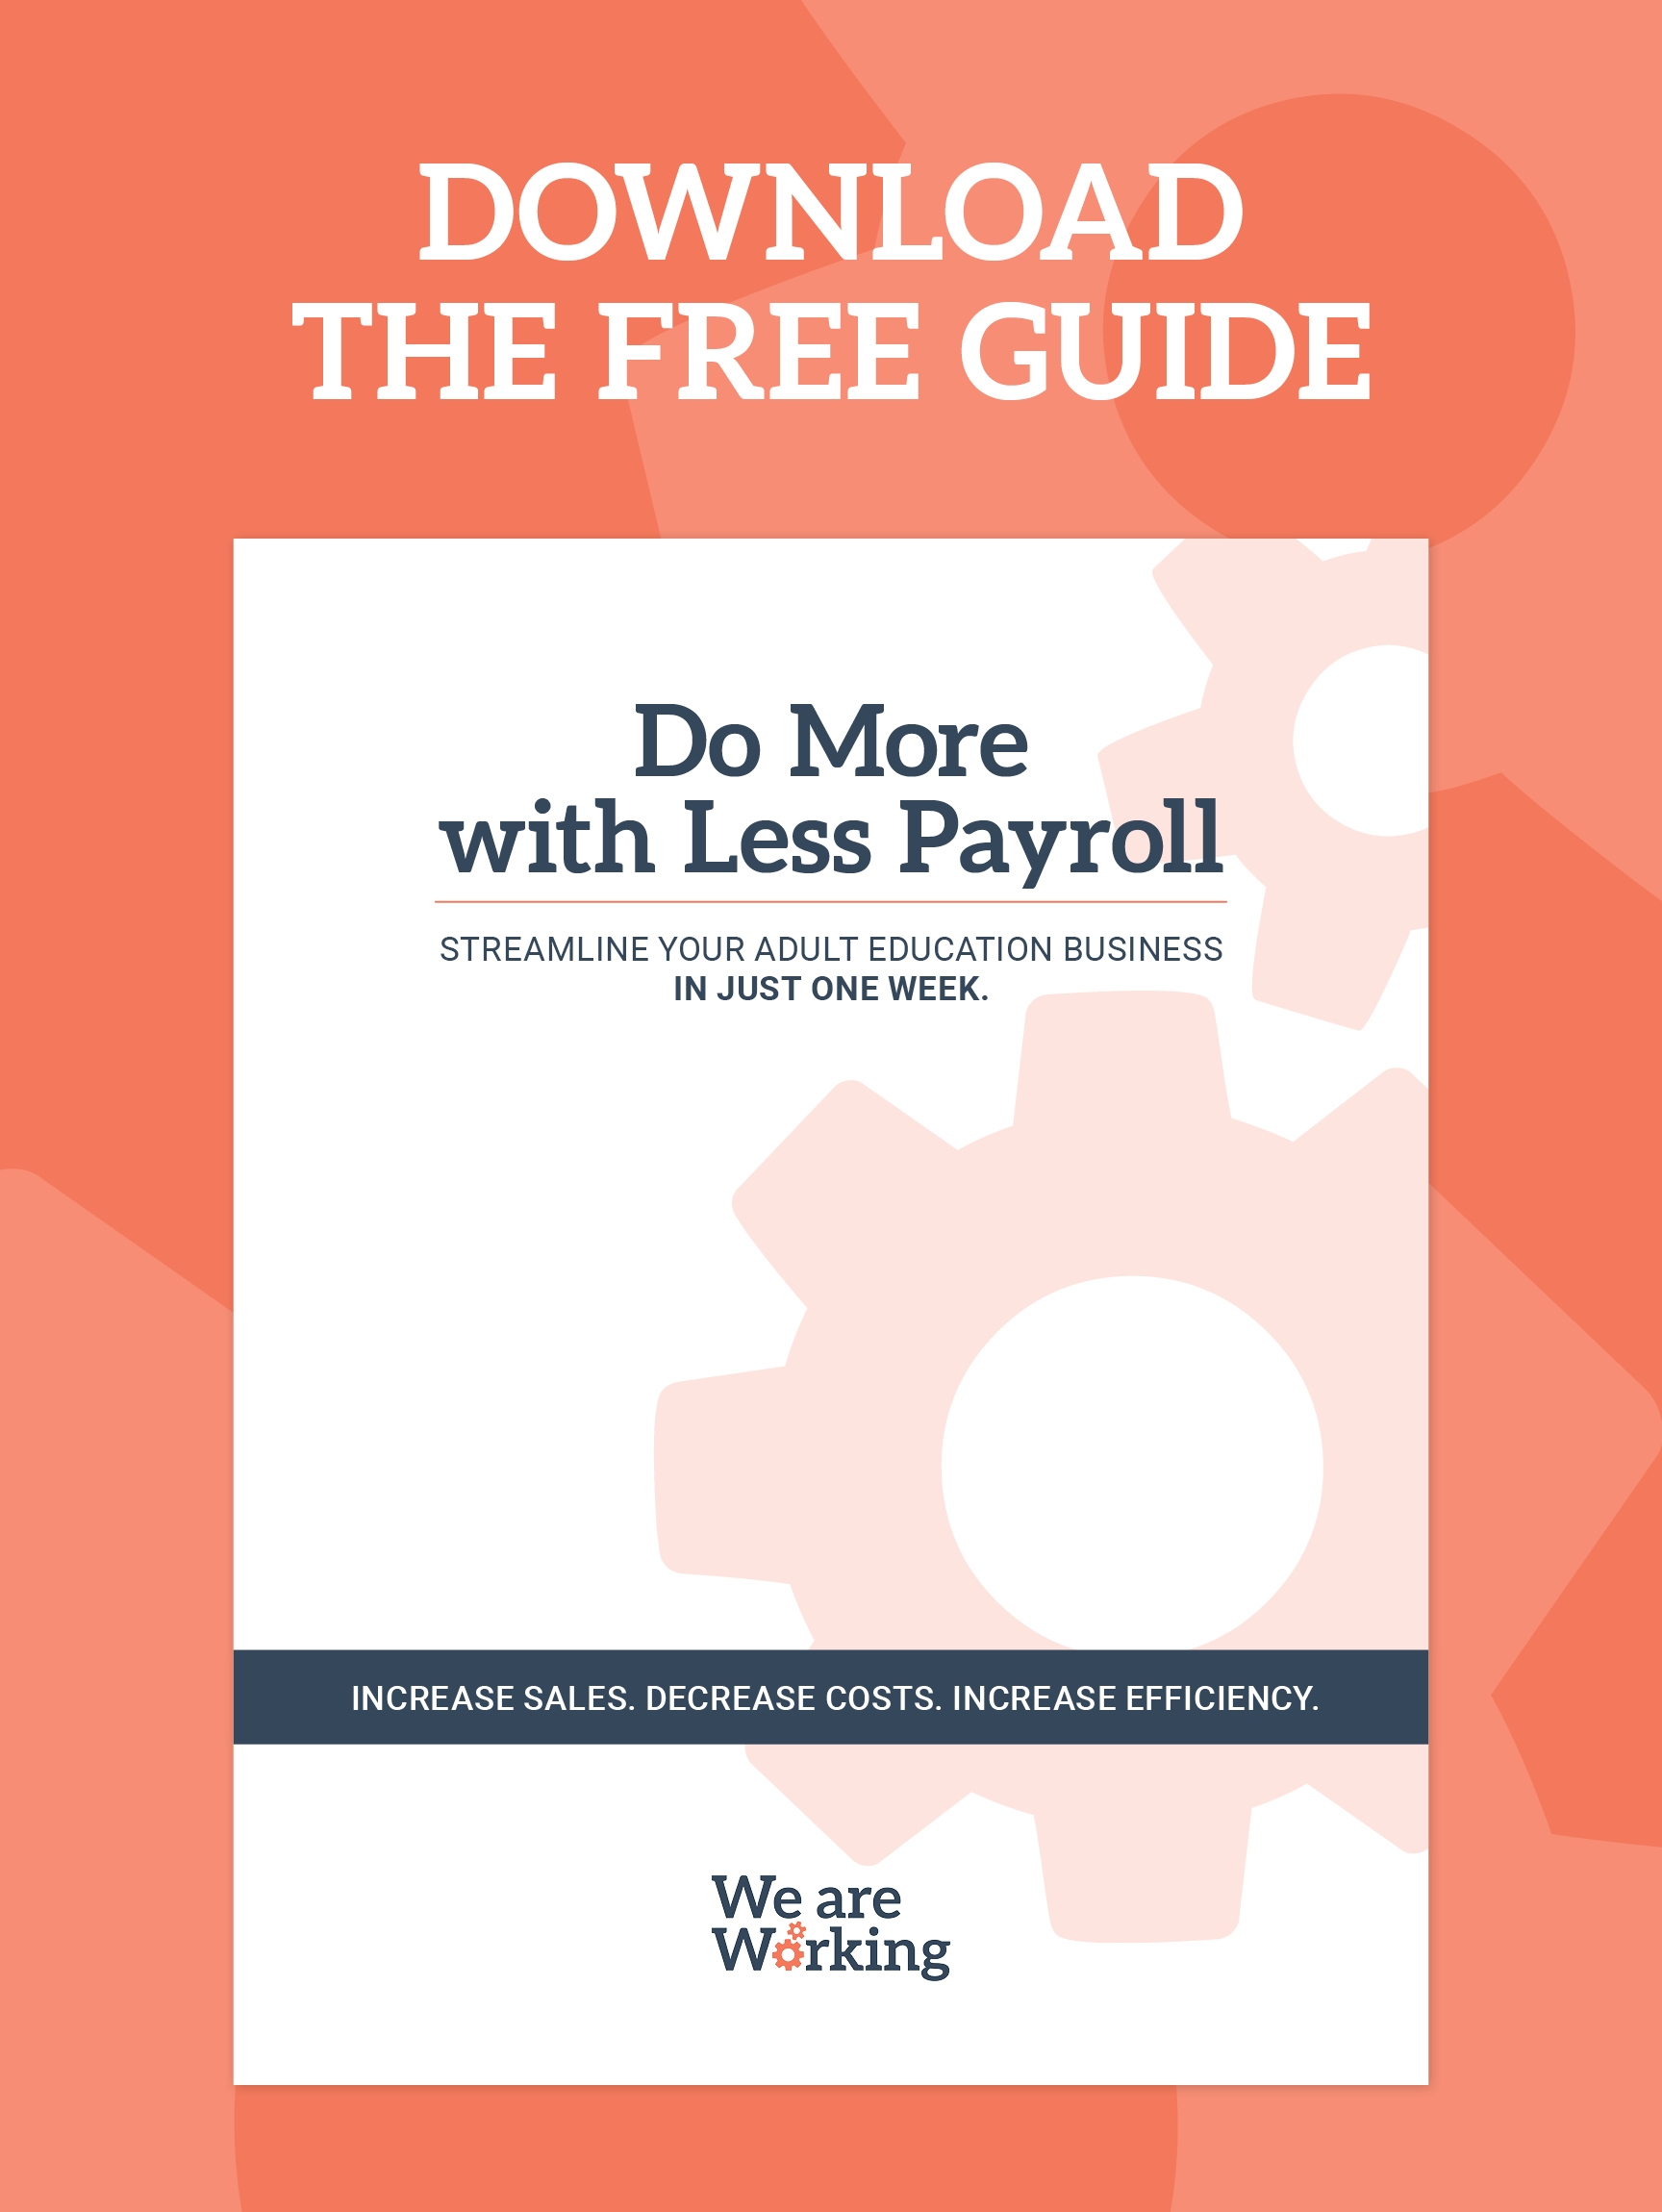 Free Guide - Do More with Less Payroll - Adult Education Business